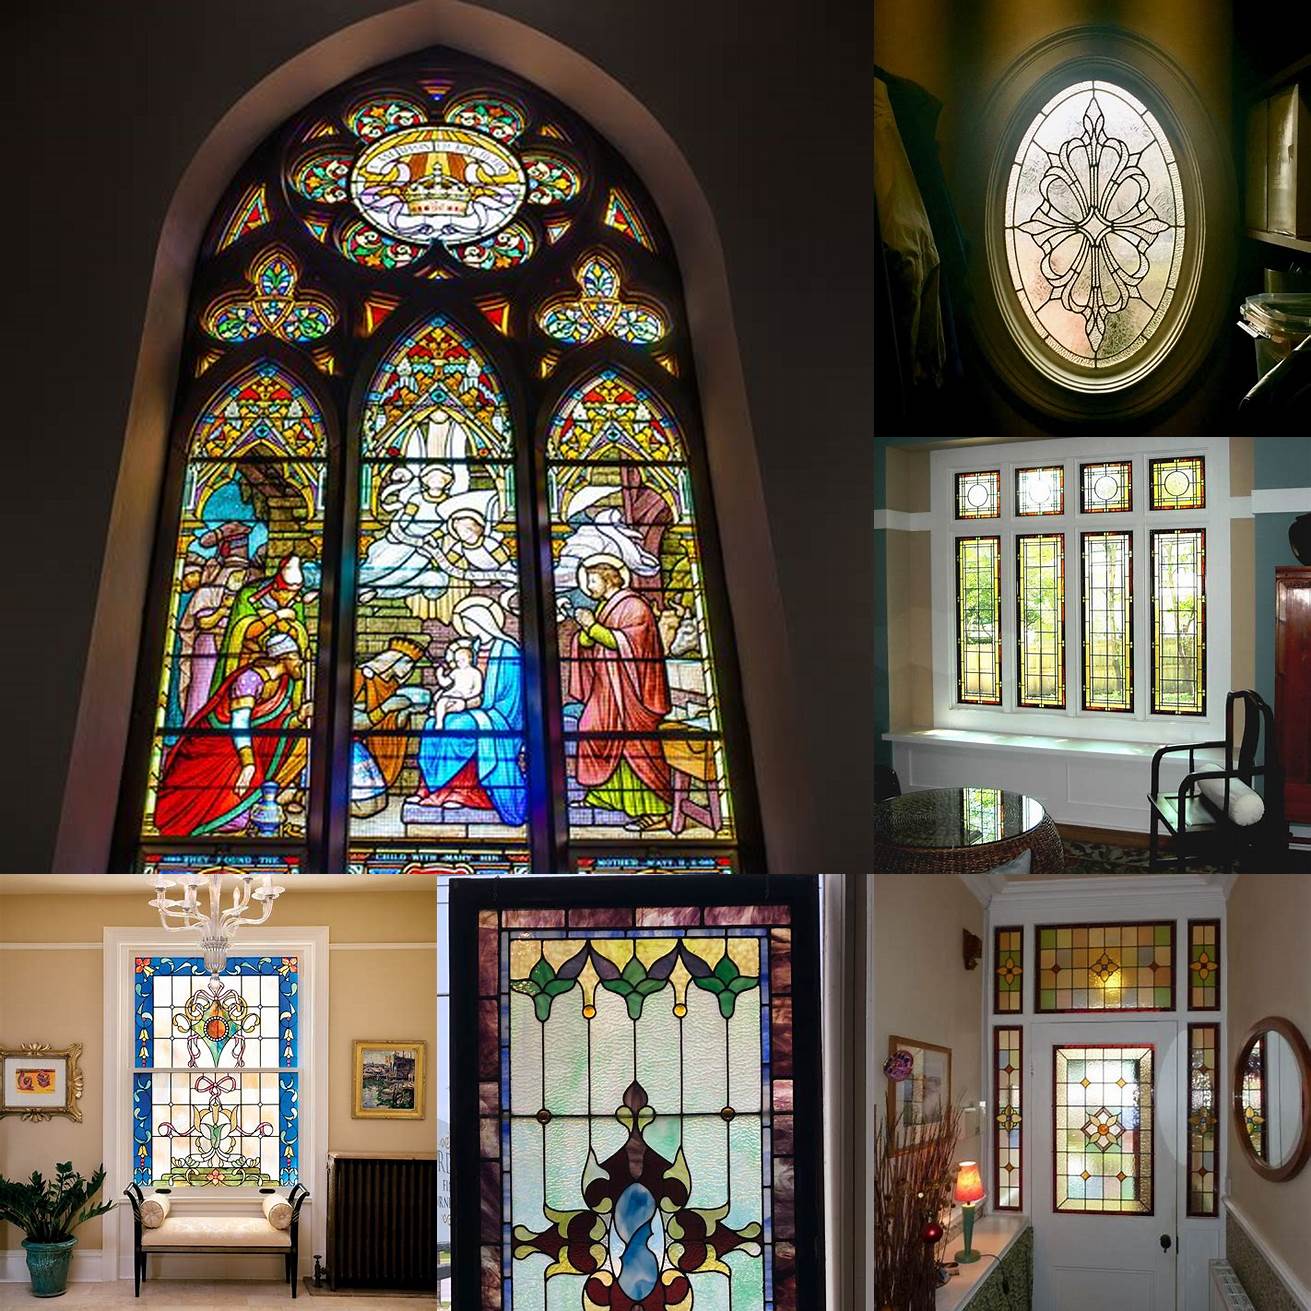 Stained glass windows for a touch of elegance